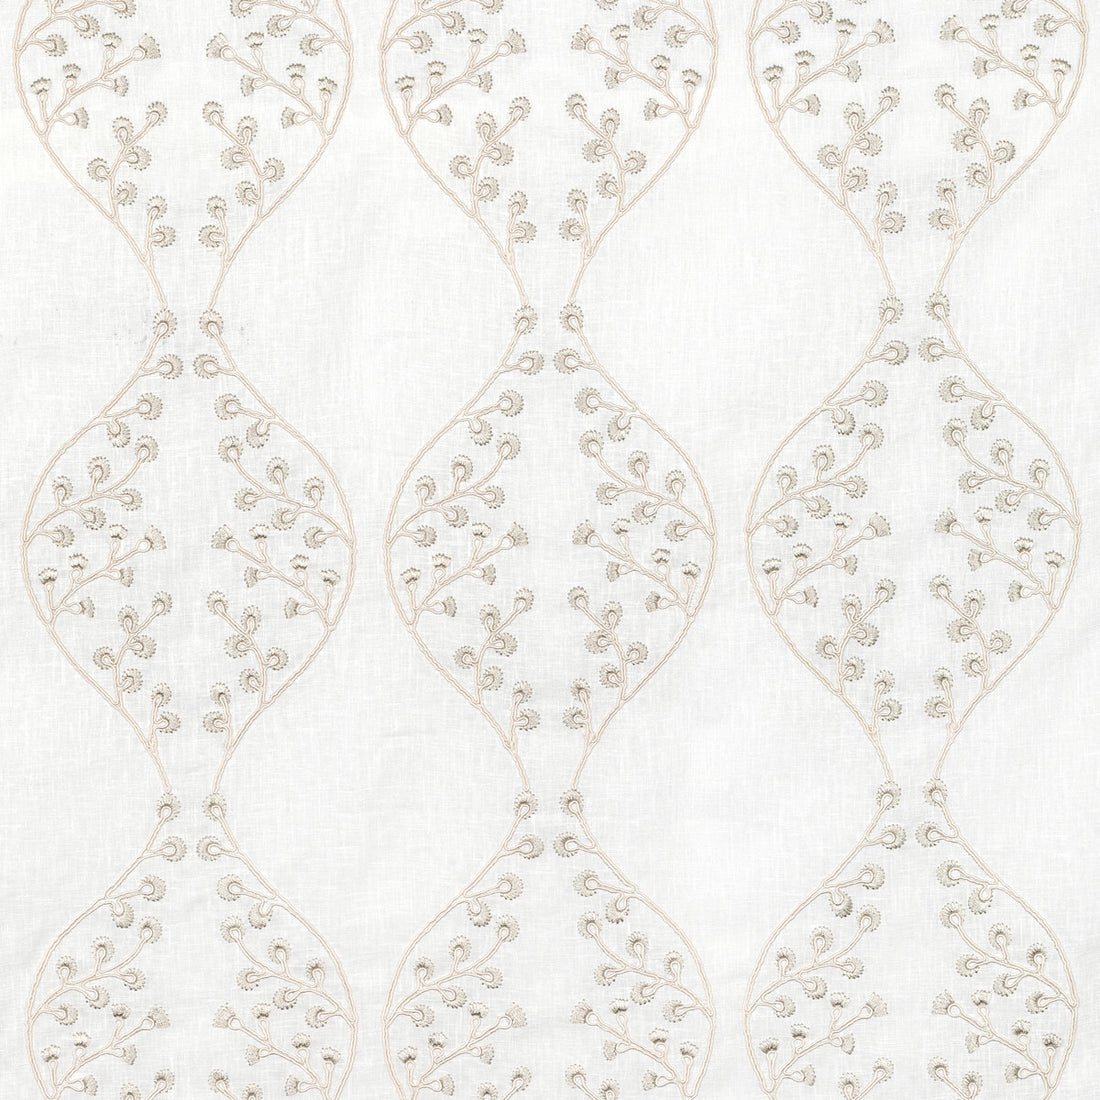 Lillie Sheer fabric in ivory/fog color - pattern 2021130.1611.0 - by Lee Jofa in the Summerland collection